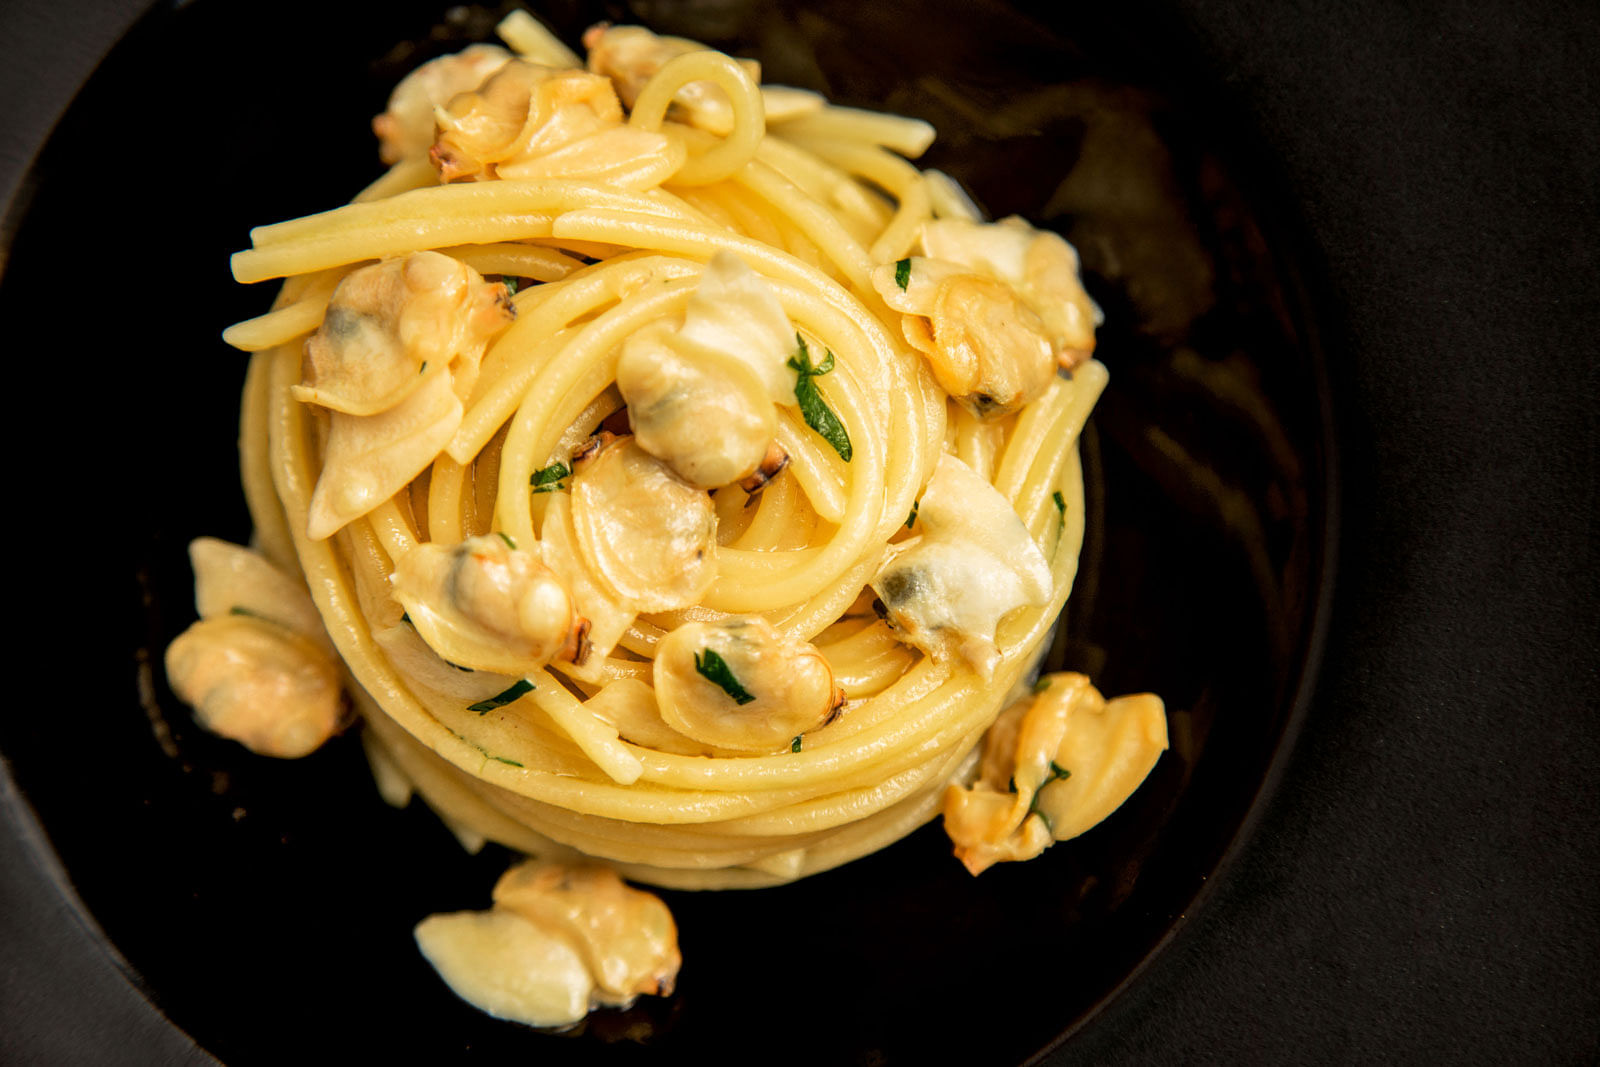 Artisanal spaghetti and dry sake-drizzled vongoleveraci (clams). PHOTO: AMERICAN EXPRESS